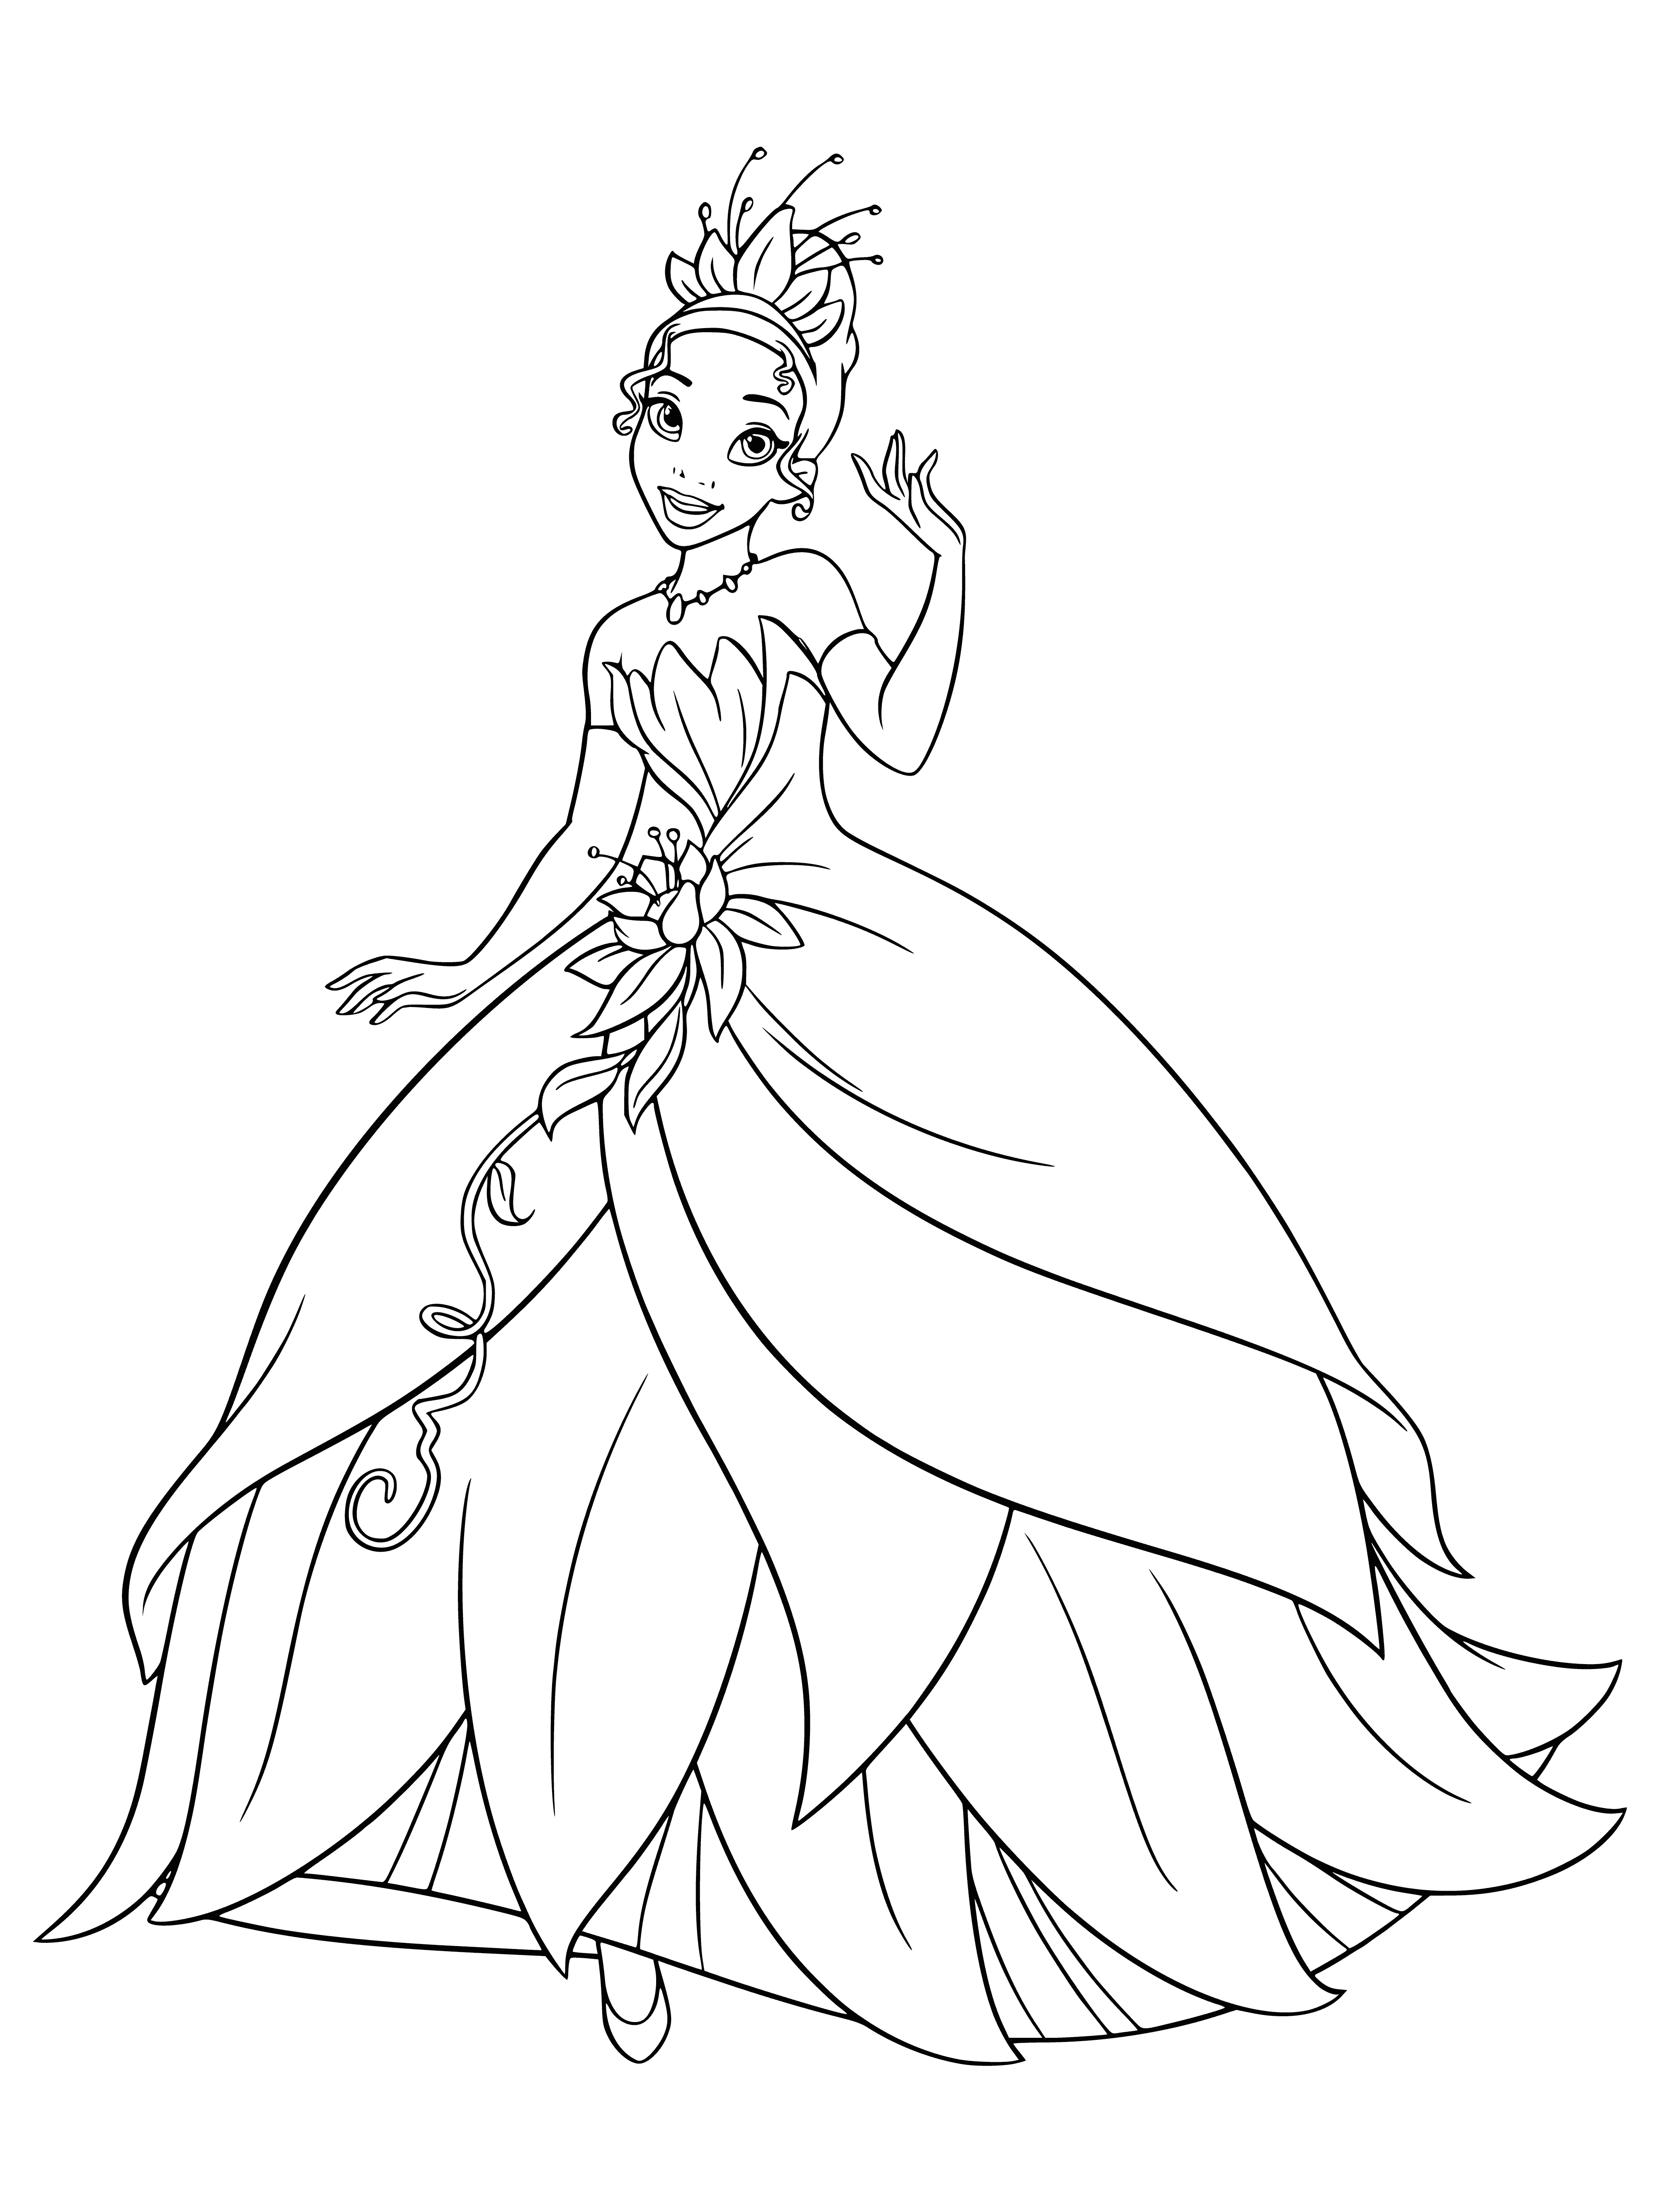 coloring page: Beautiful Princess Tiana stands in a tall grass field before a large tree, wearing a green dress and gold tiara, with a frog on a lily pad beside her.